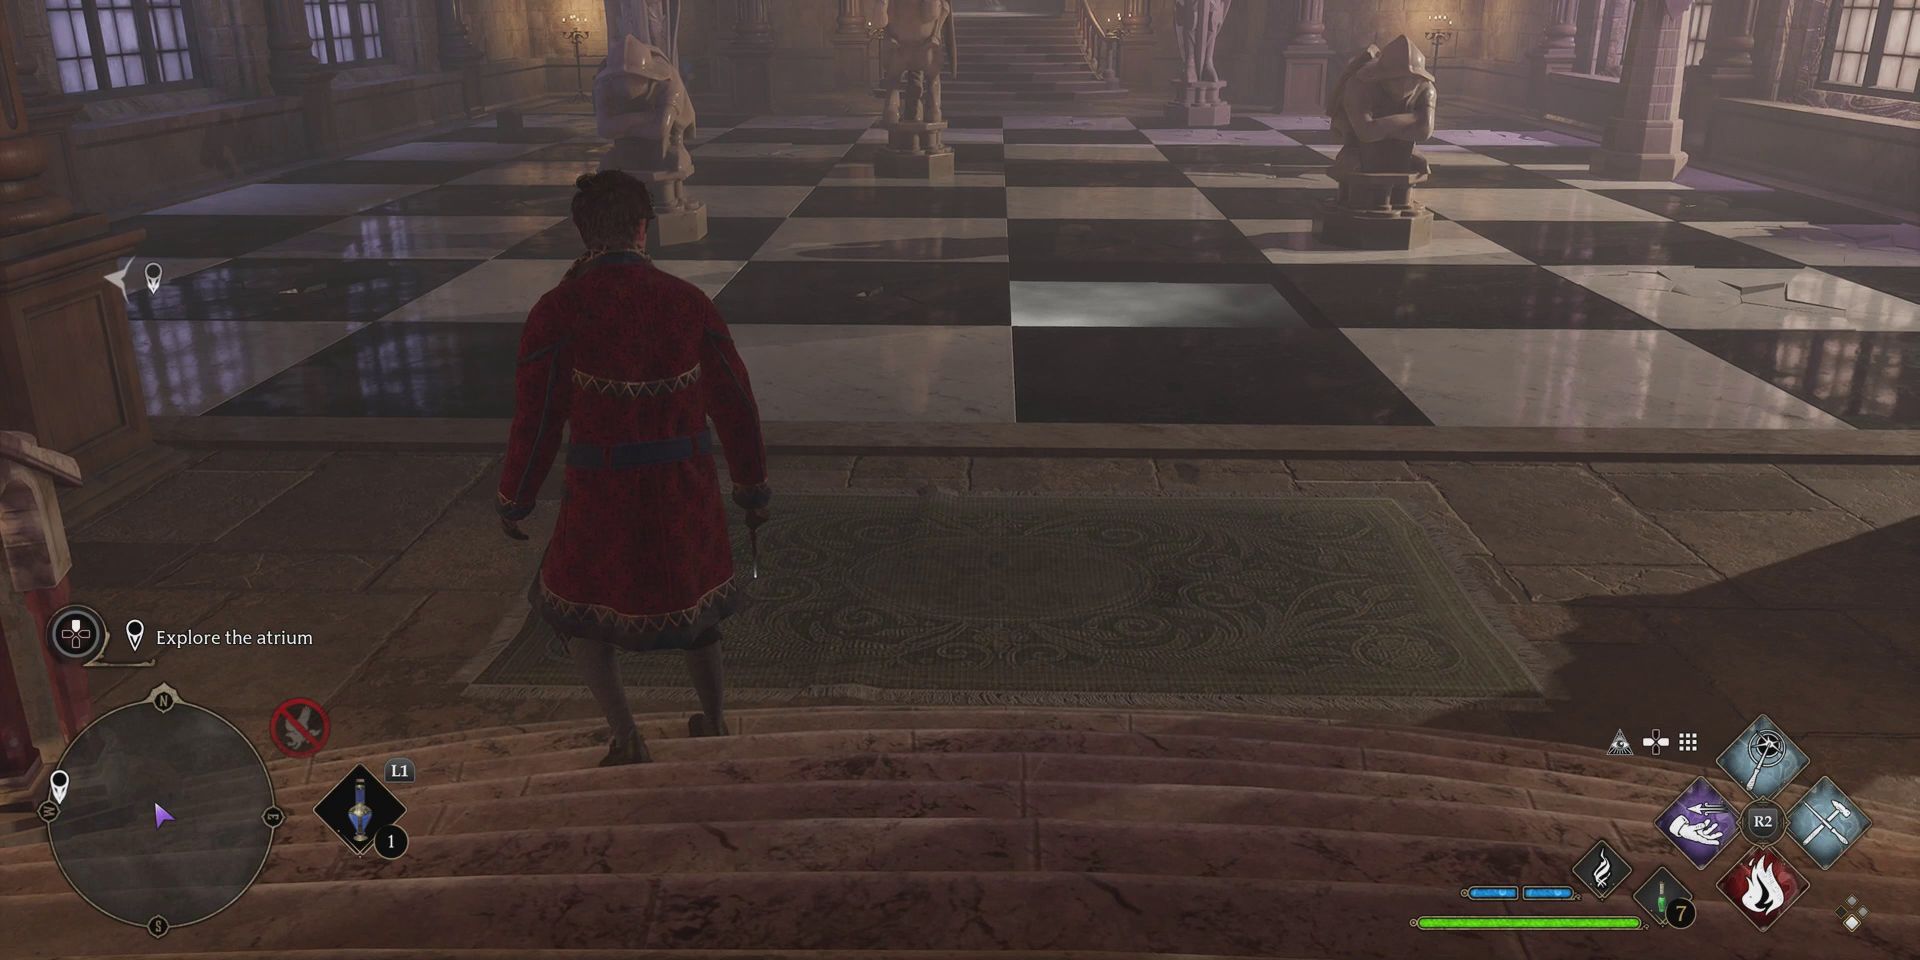 hogwarts-legacy-minding-your-own-business-side-quest-walkthrough-13-right-path-chess